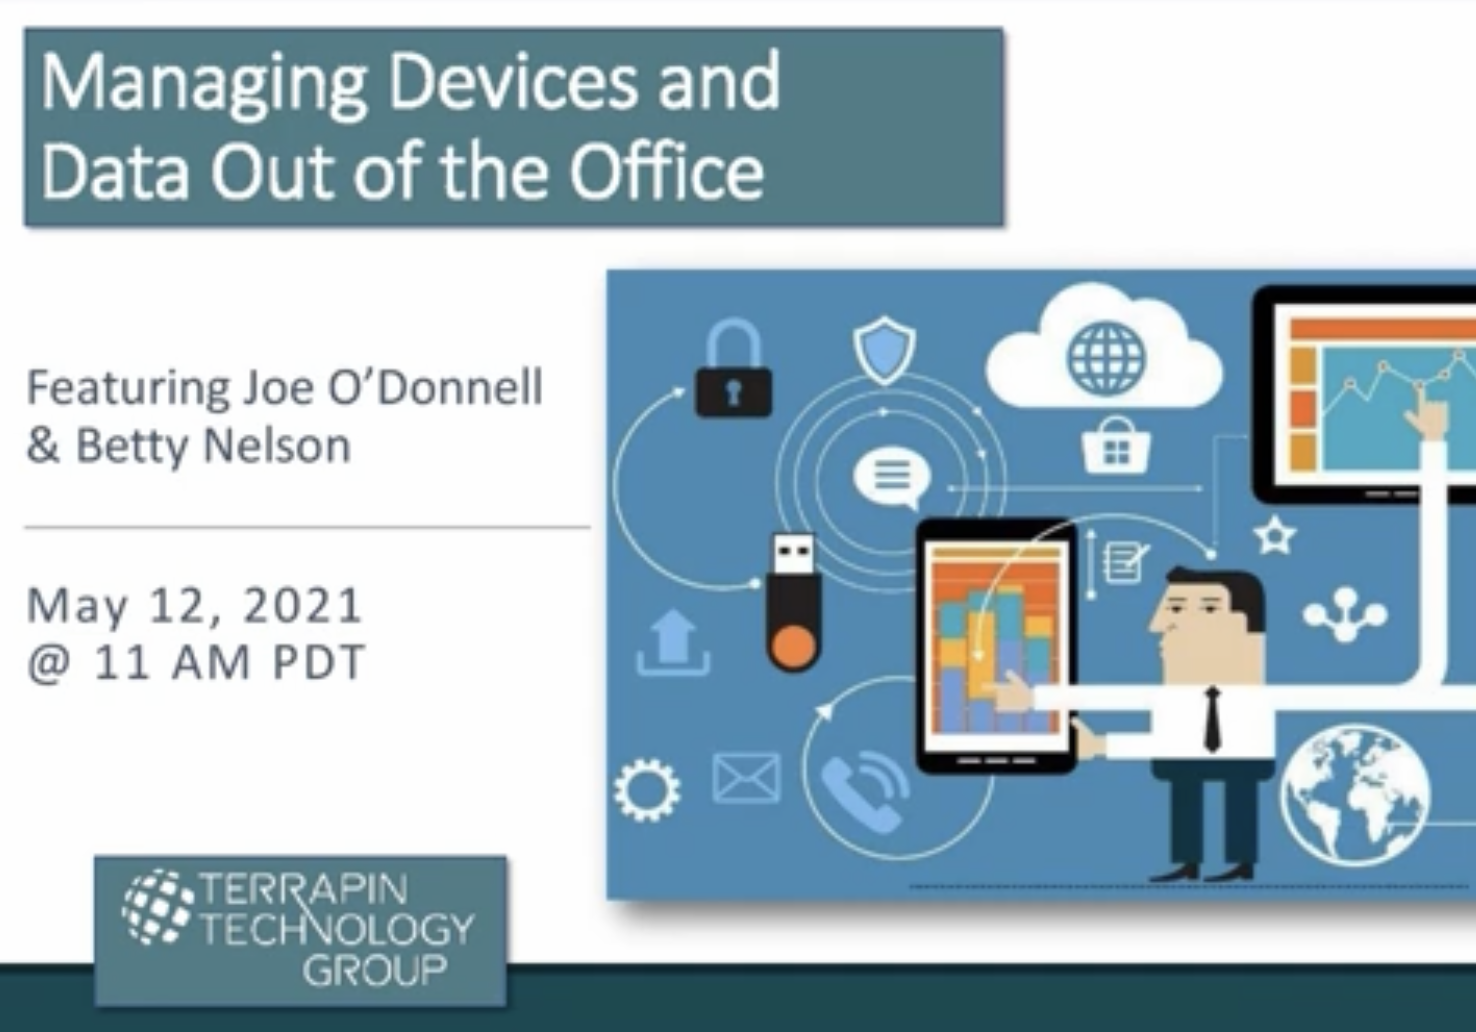 Managing Devices and Data Out of the Office